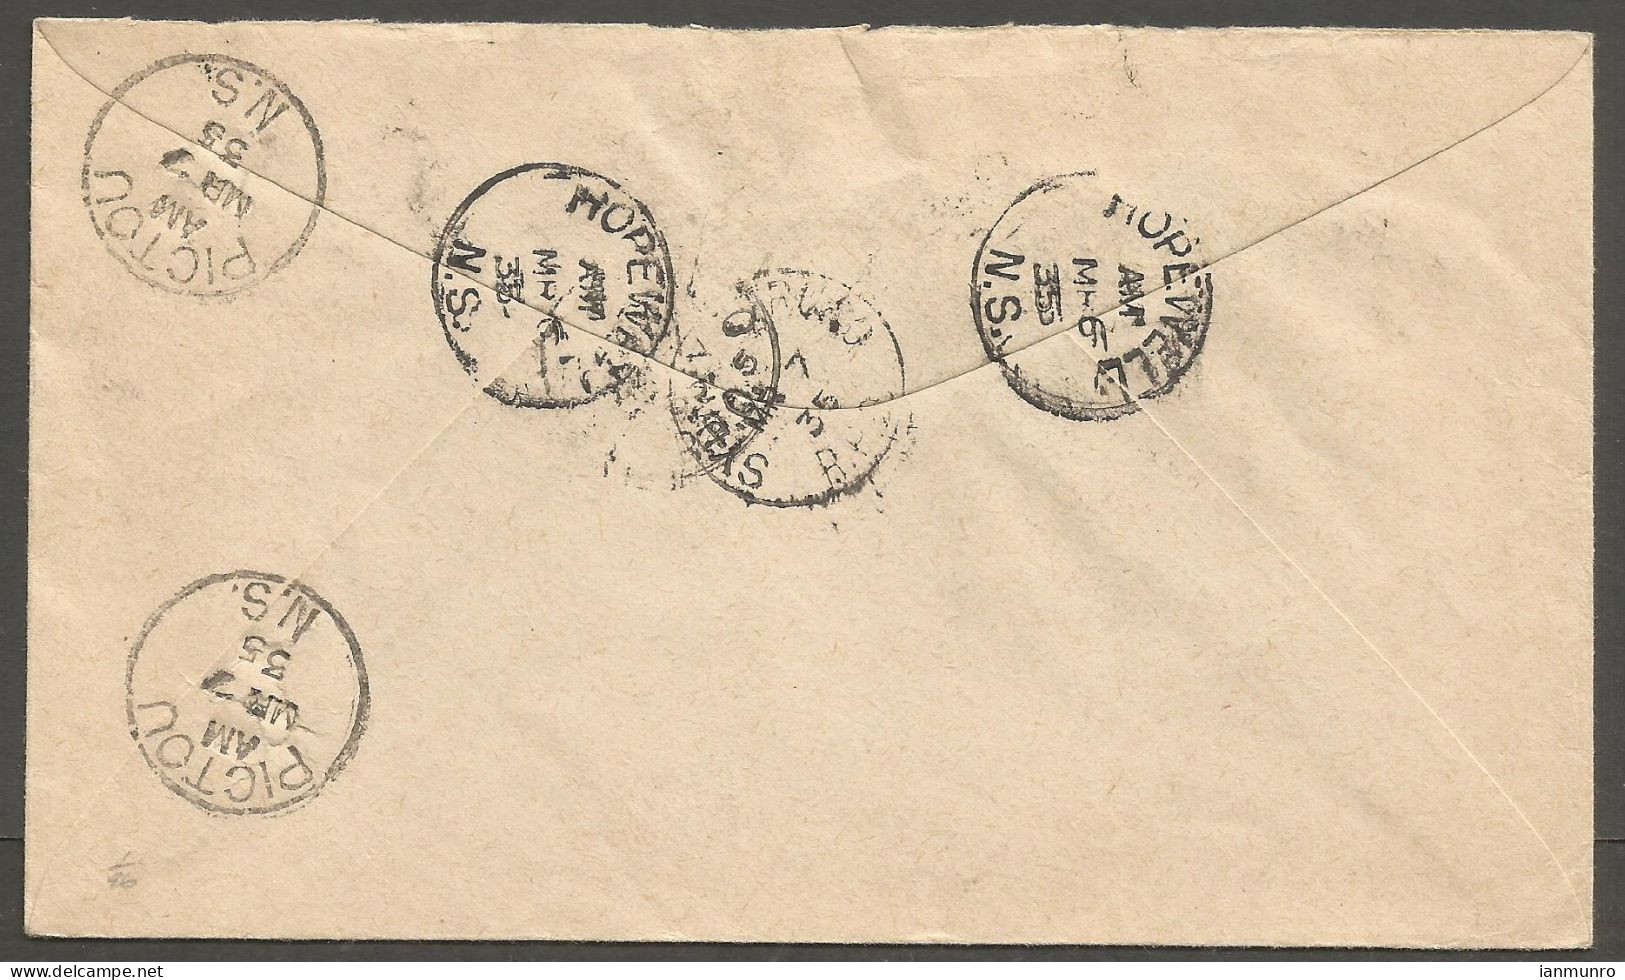 1935 Registered Cover 13c Cartier/Medallion RPO CDS Hopewell To Pictou Nova Scotia - Postal History